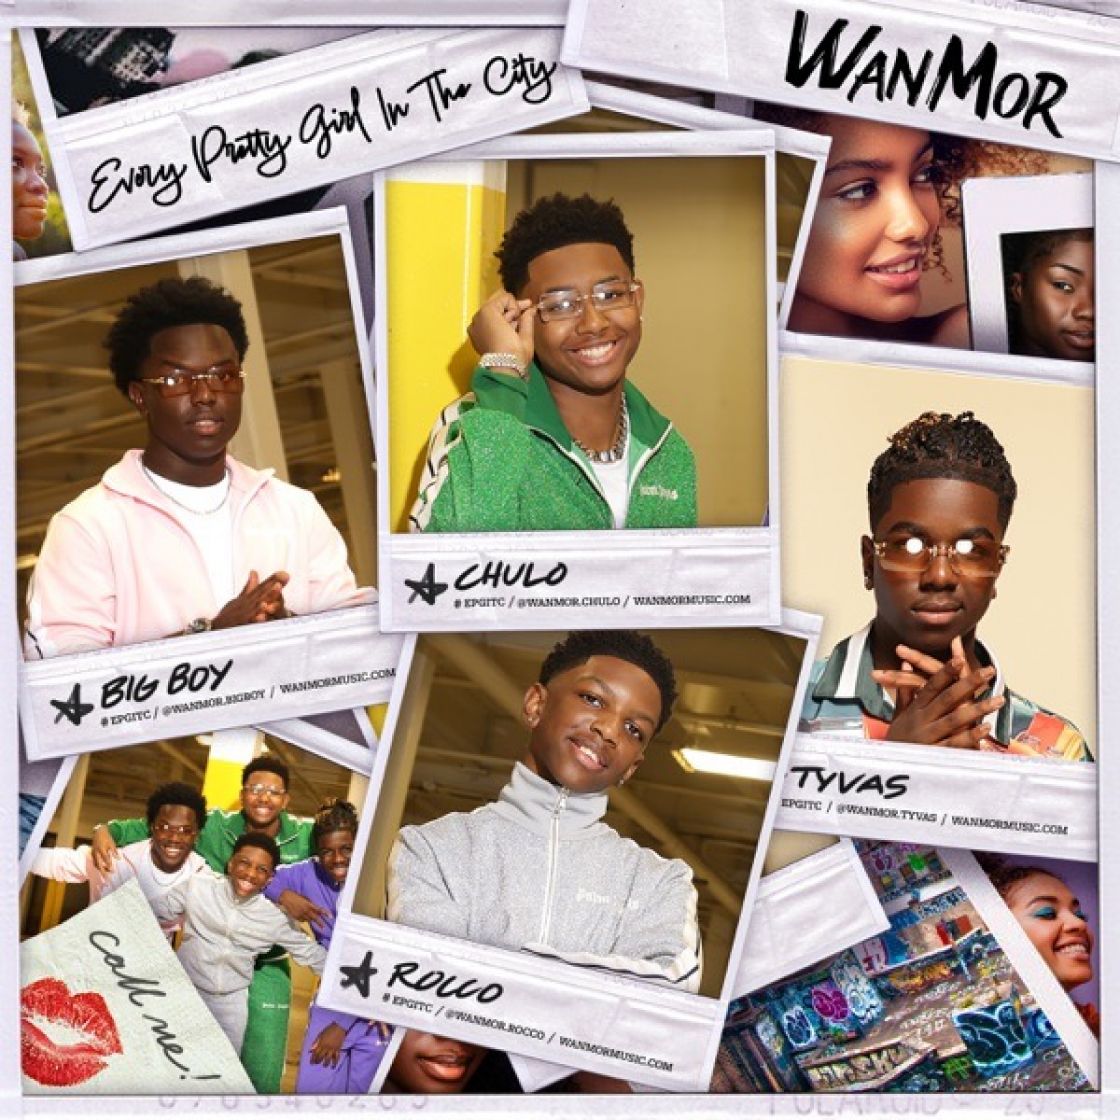 New Music by WanMor - Every Pretty Girl In The City